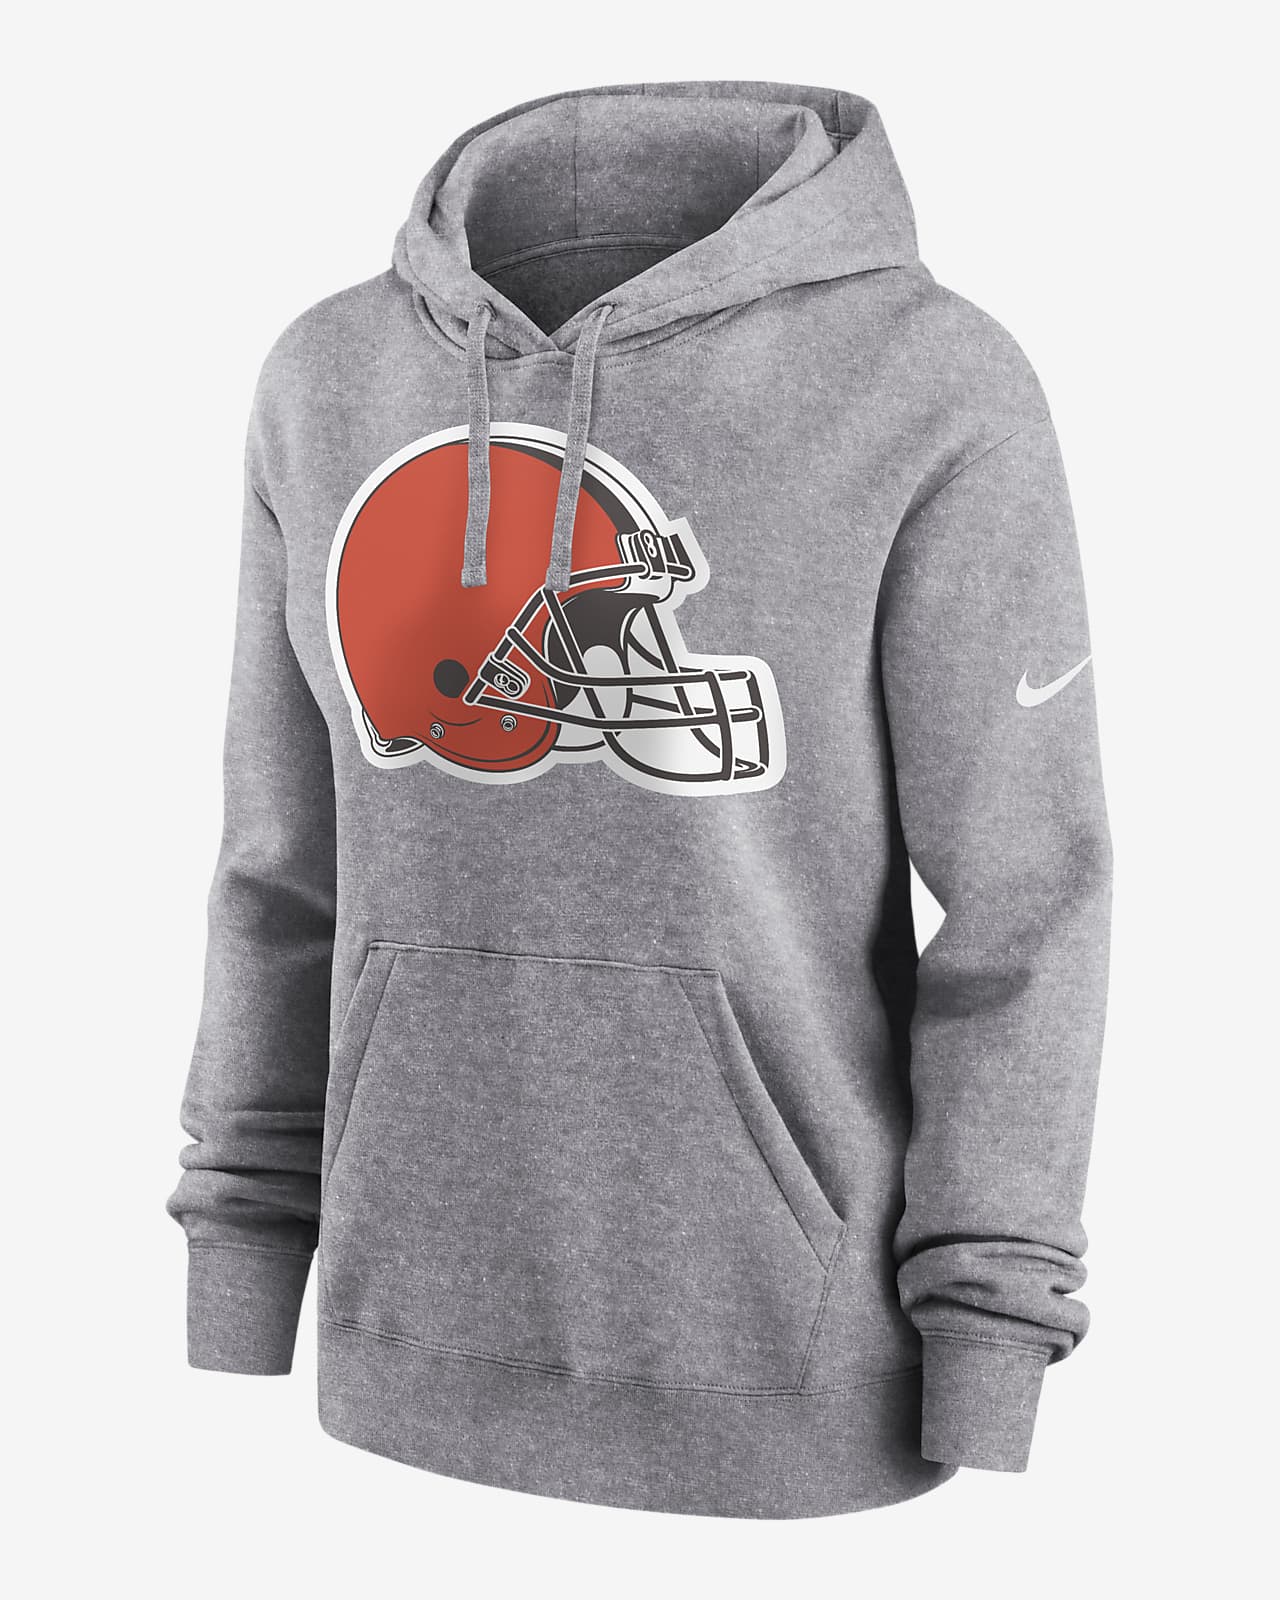 Nike Women's Logo Club (NFL Cleveland Browns) Pullover Hoodie in Grey, Size: Medium | 00Z506G93-D9C